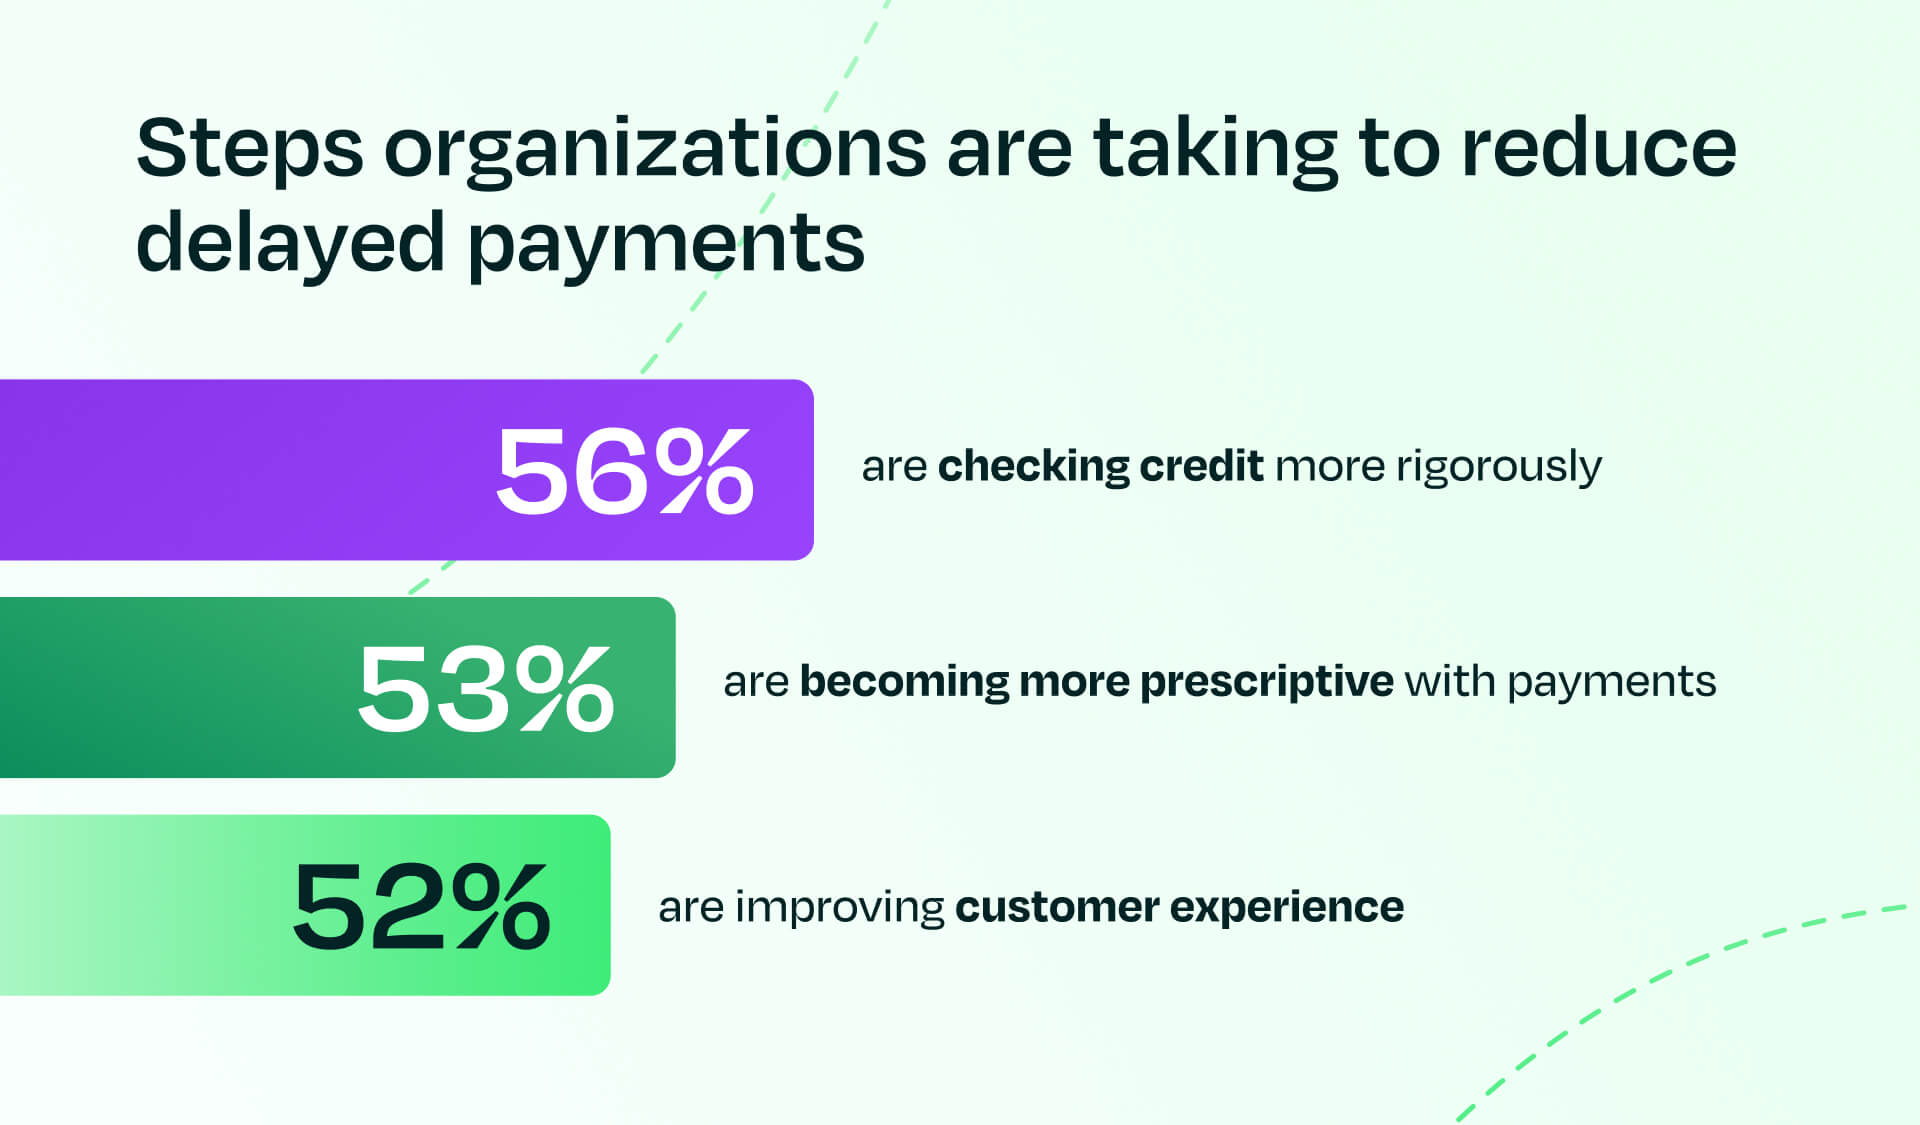 Steps organizations are taking to reduce delayed payments stat chart